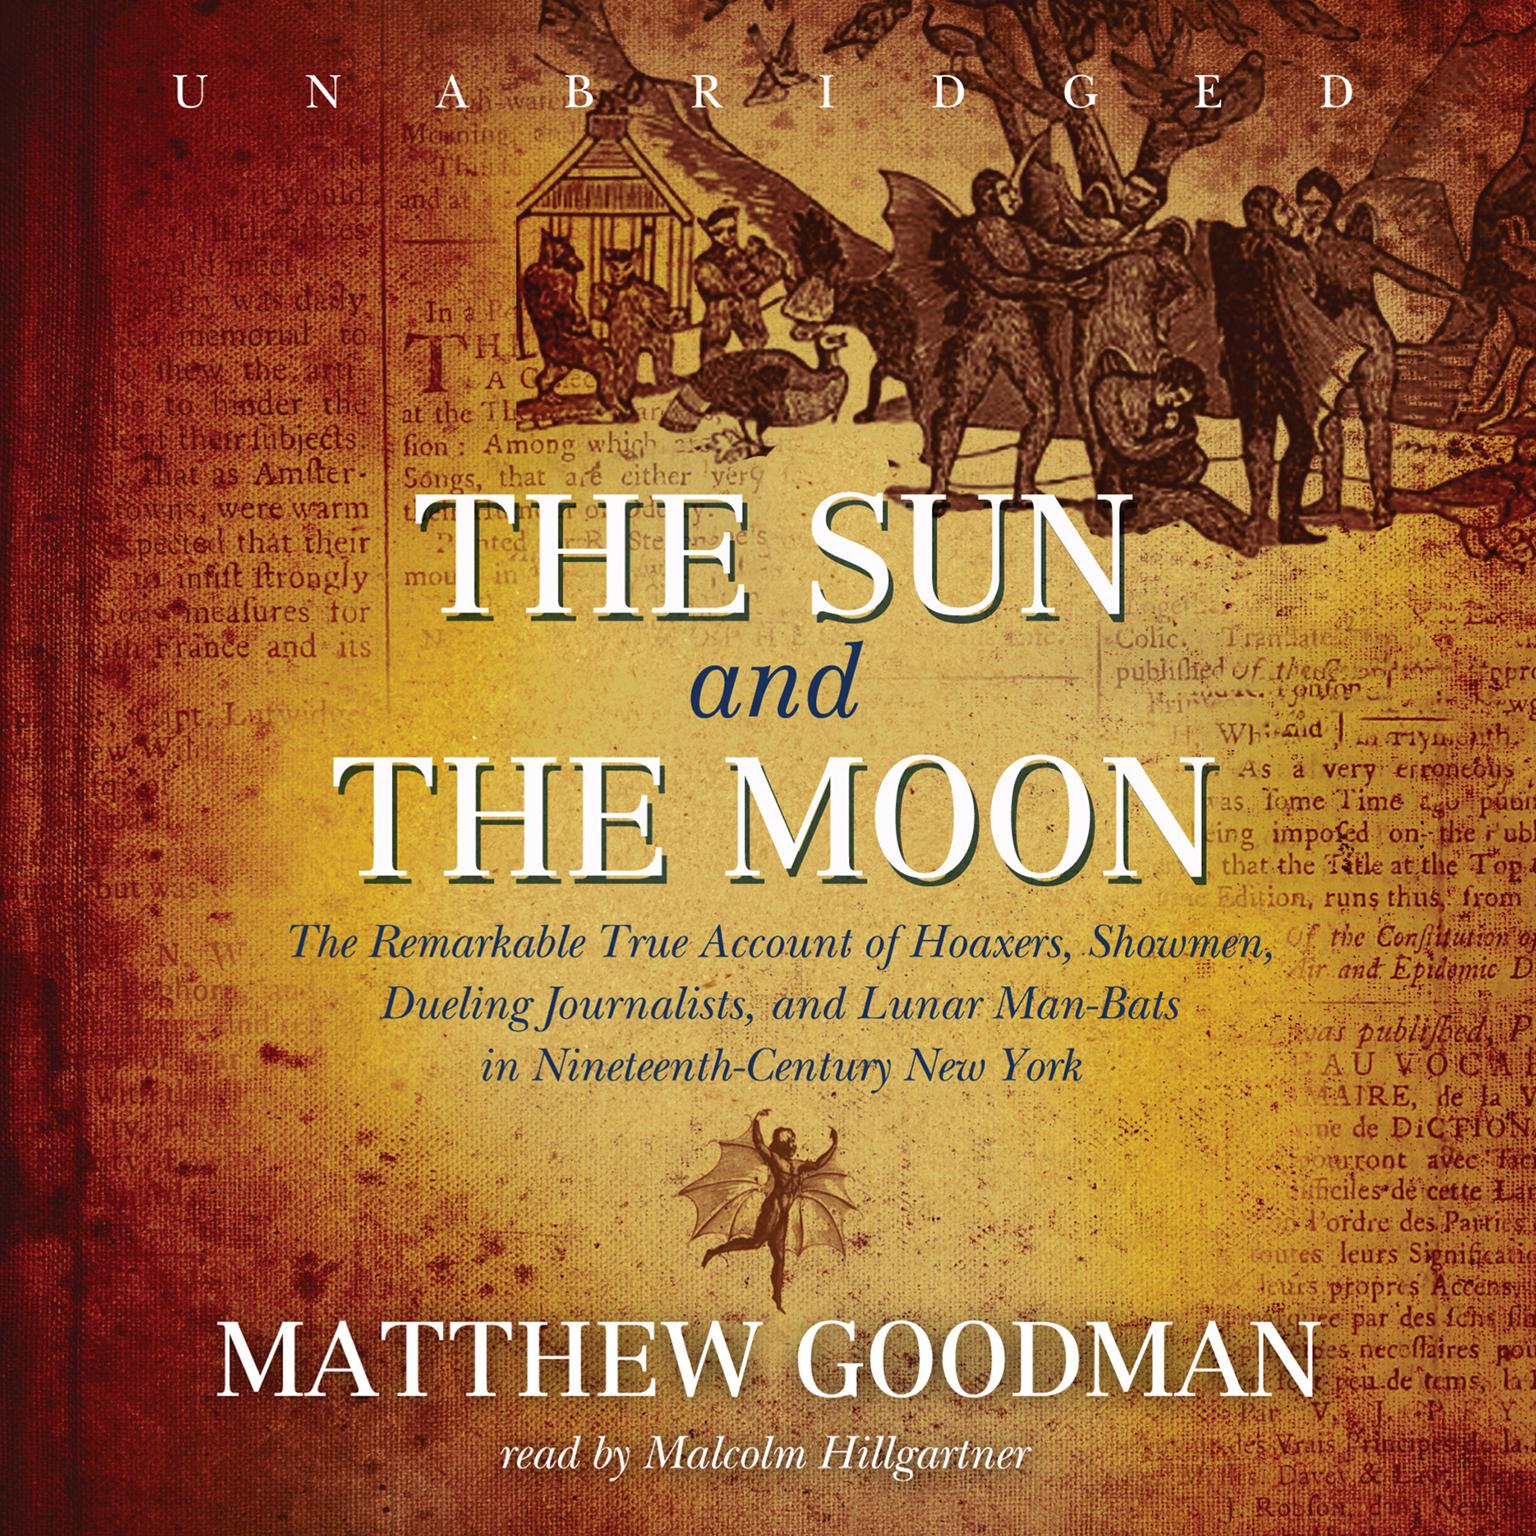 The Sun and the Moon: The Remarkable True Account of Hoaxers, Showmen, Dueling Journalists, and Lunar Man-Bats in Nineteenth-Century New York Audiobook, by Matthew Goodman